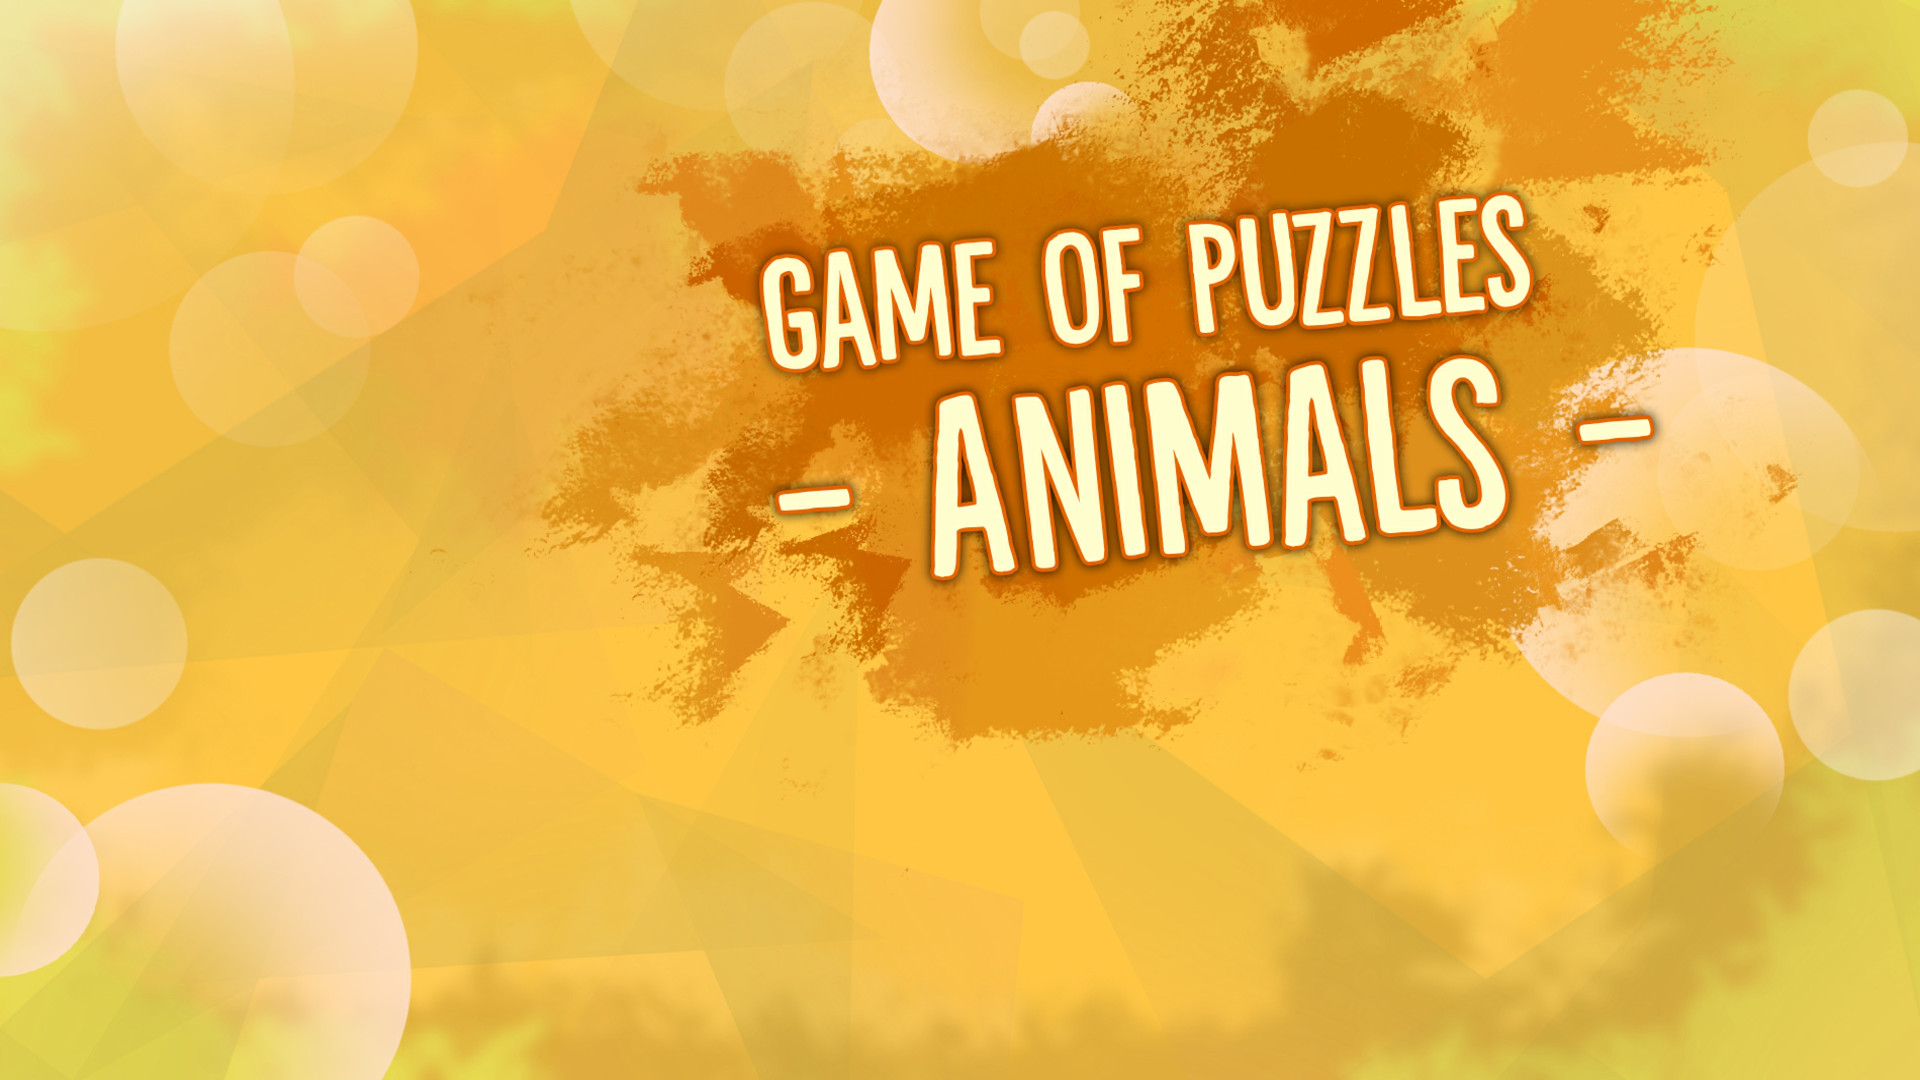 Game Of Puzzles: Animals - Soundtrack Featured Screenshot #1